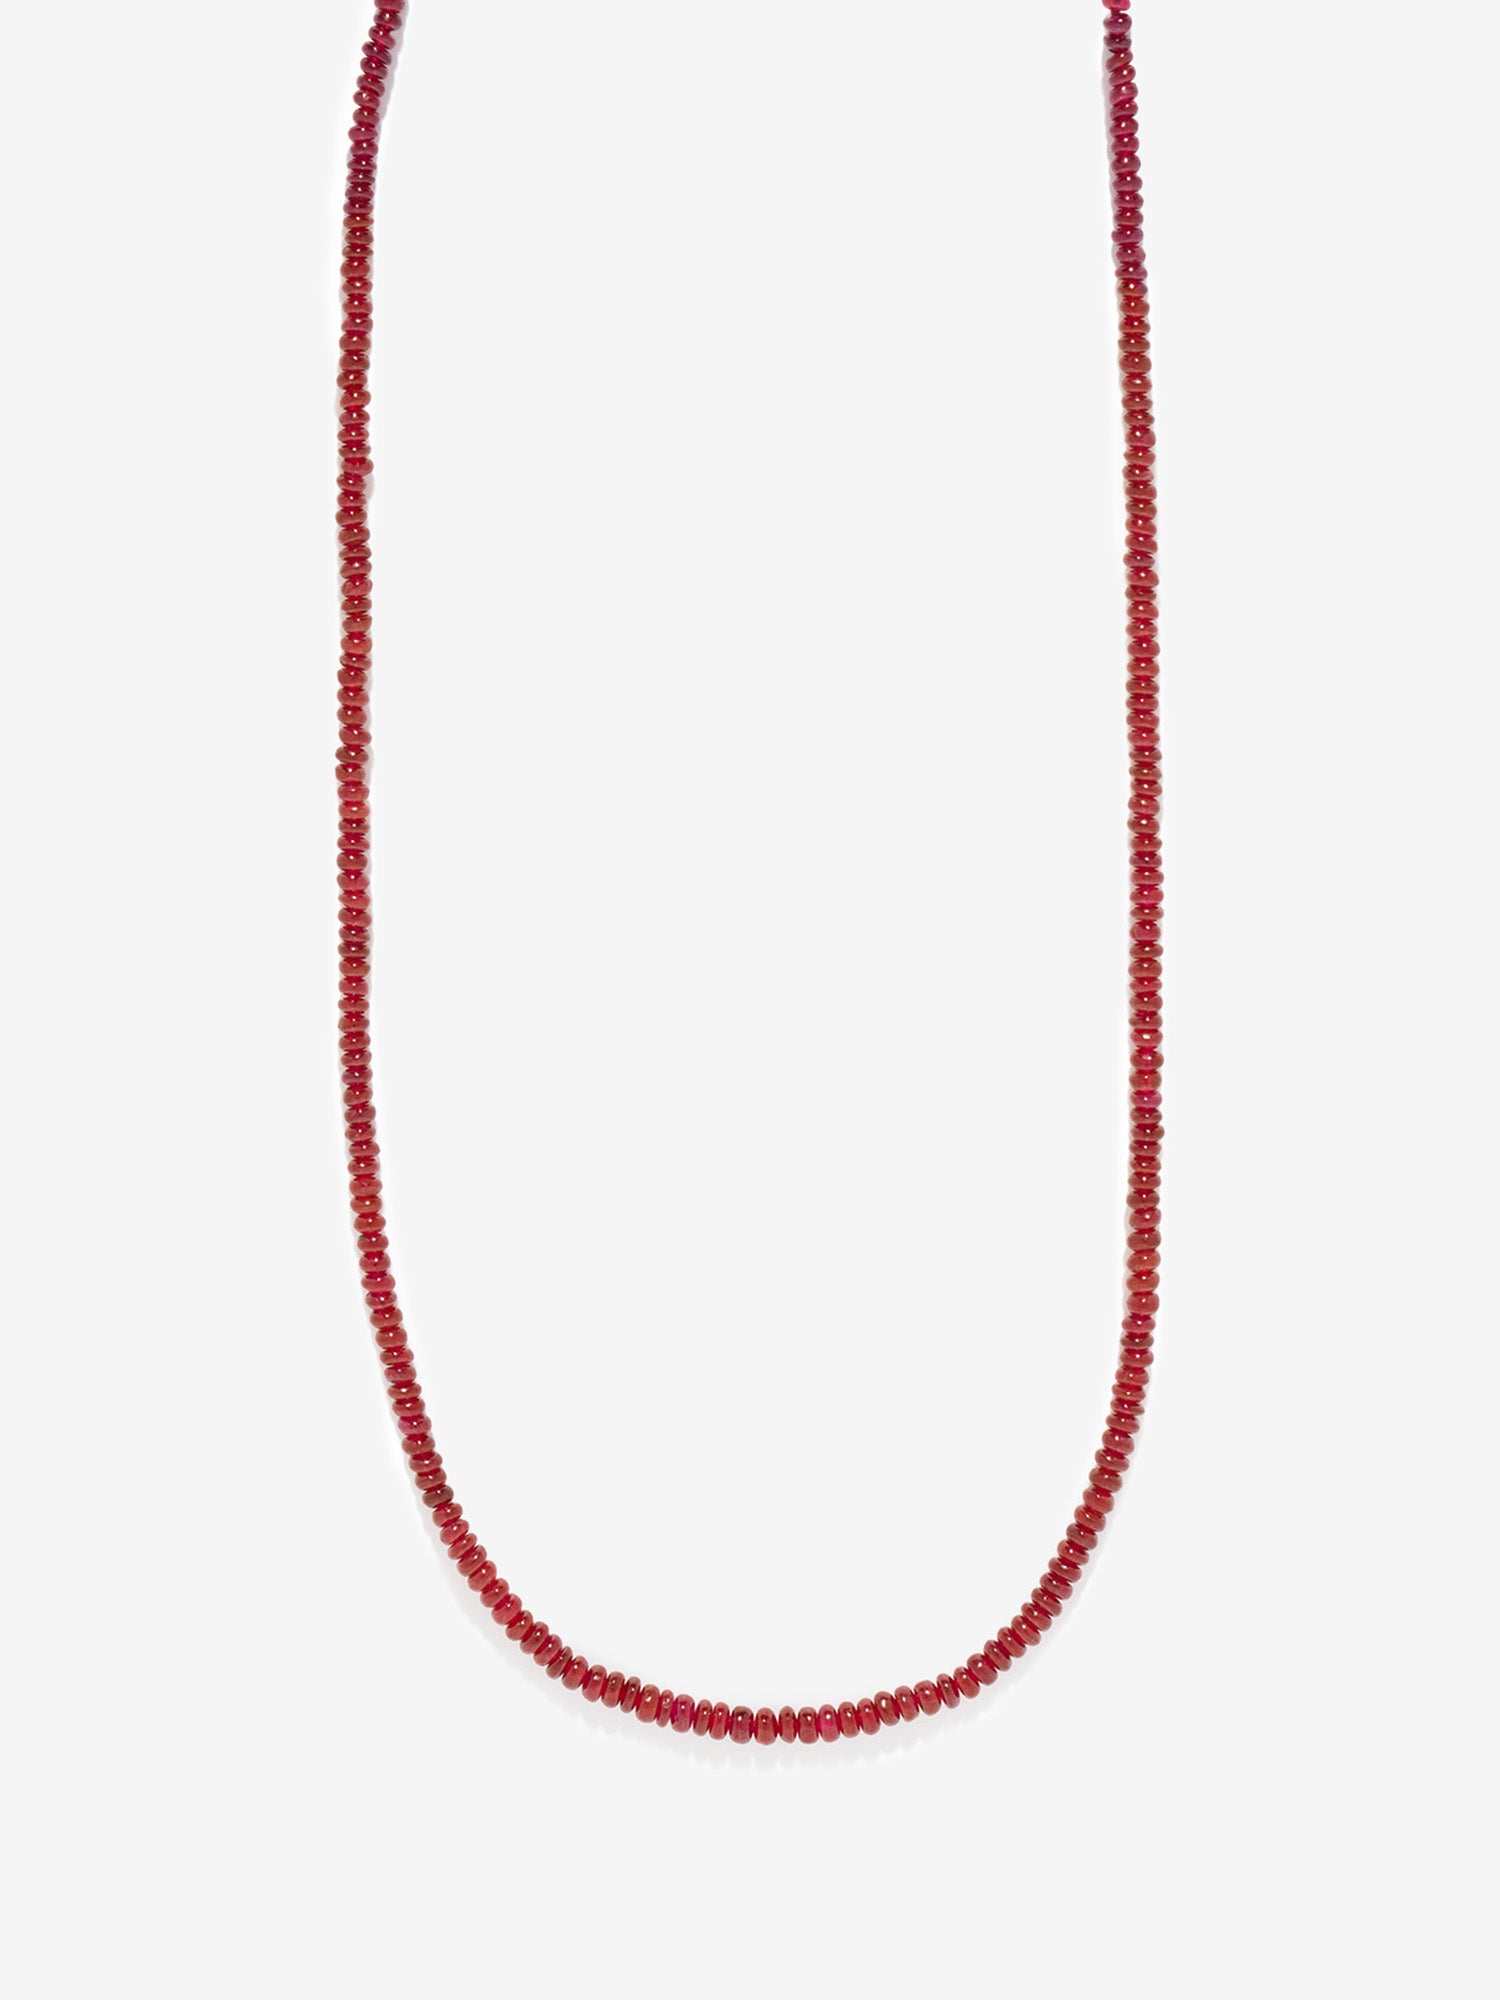 Small Ruby Bead Necklace